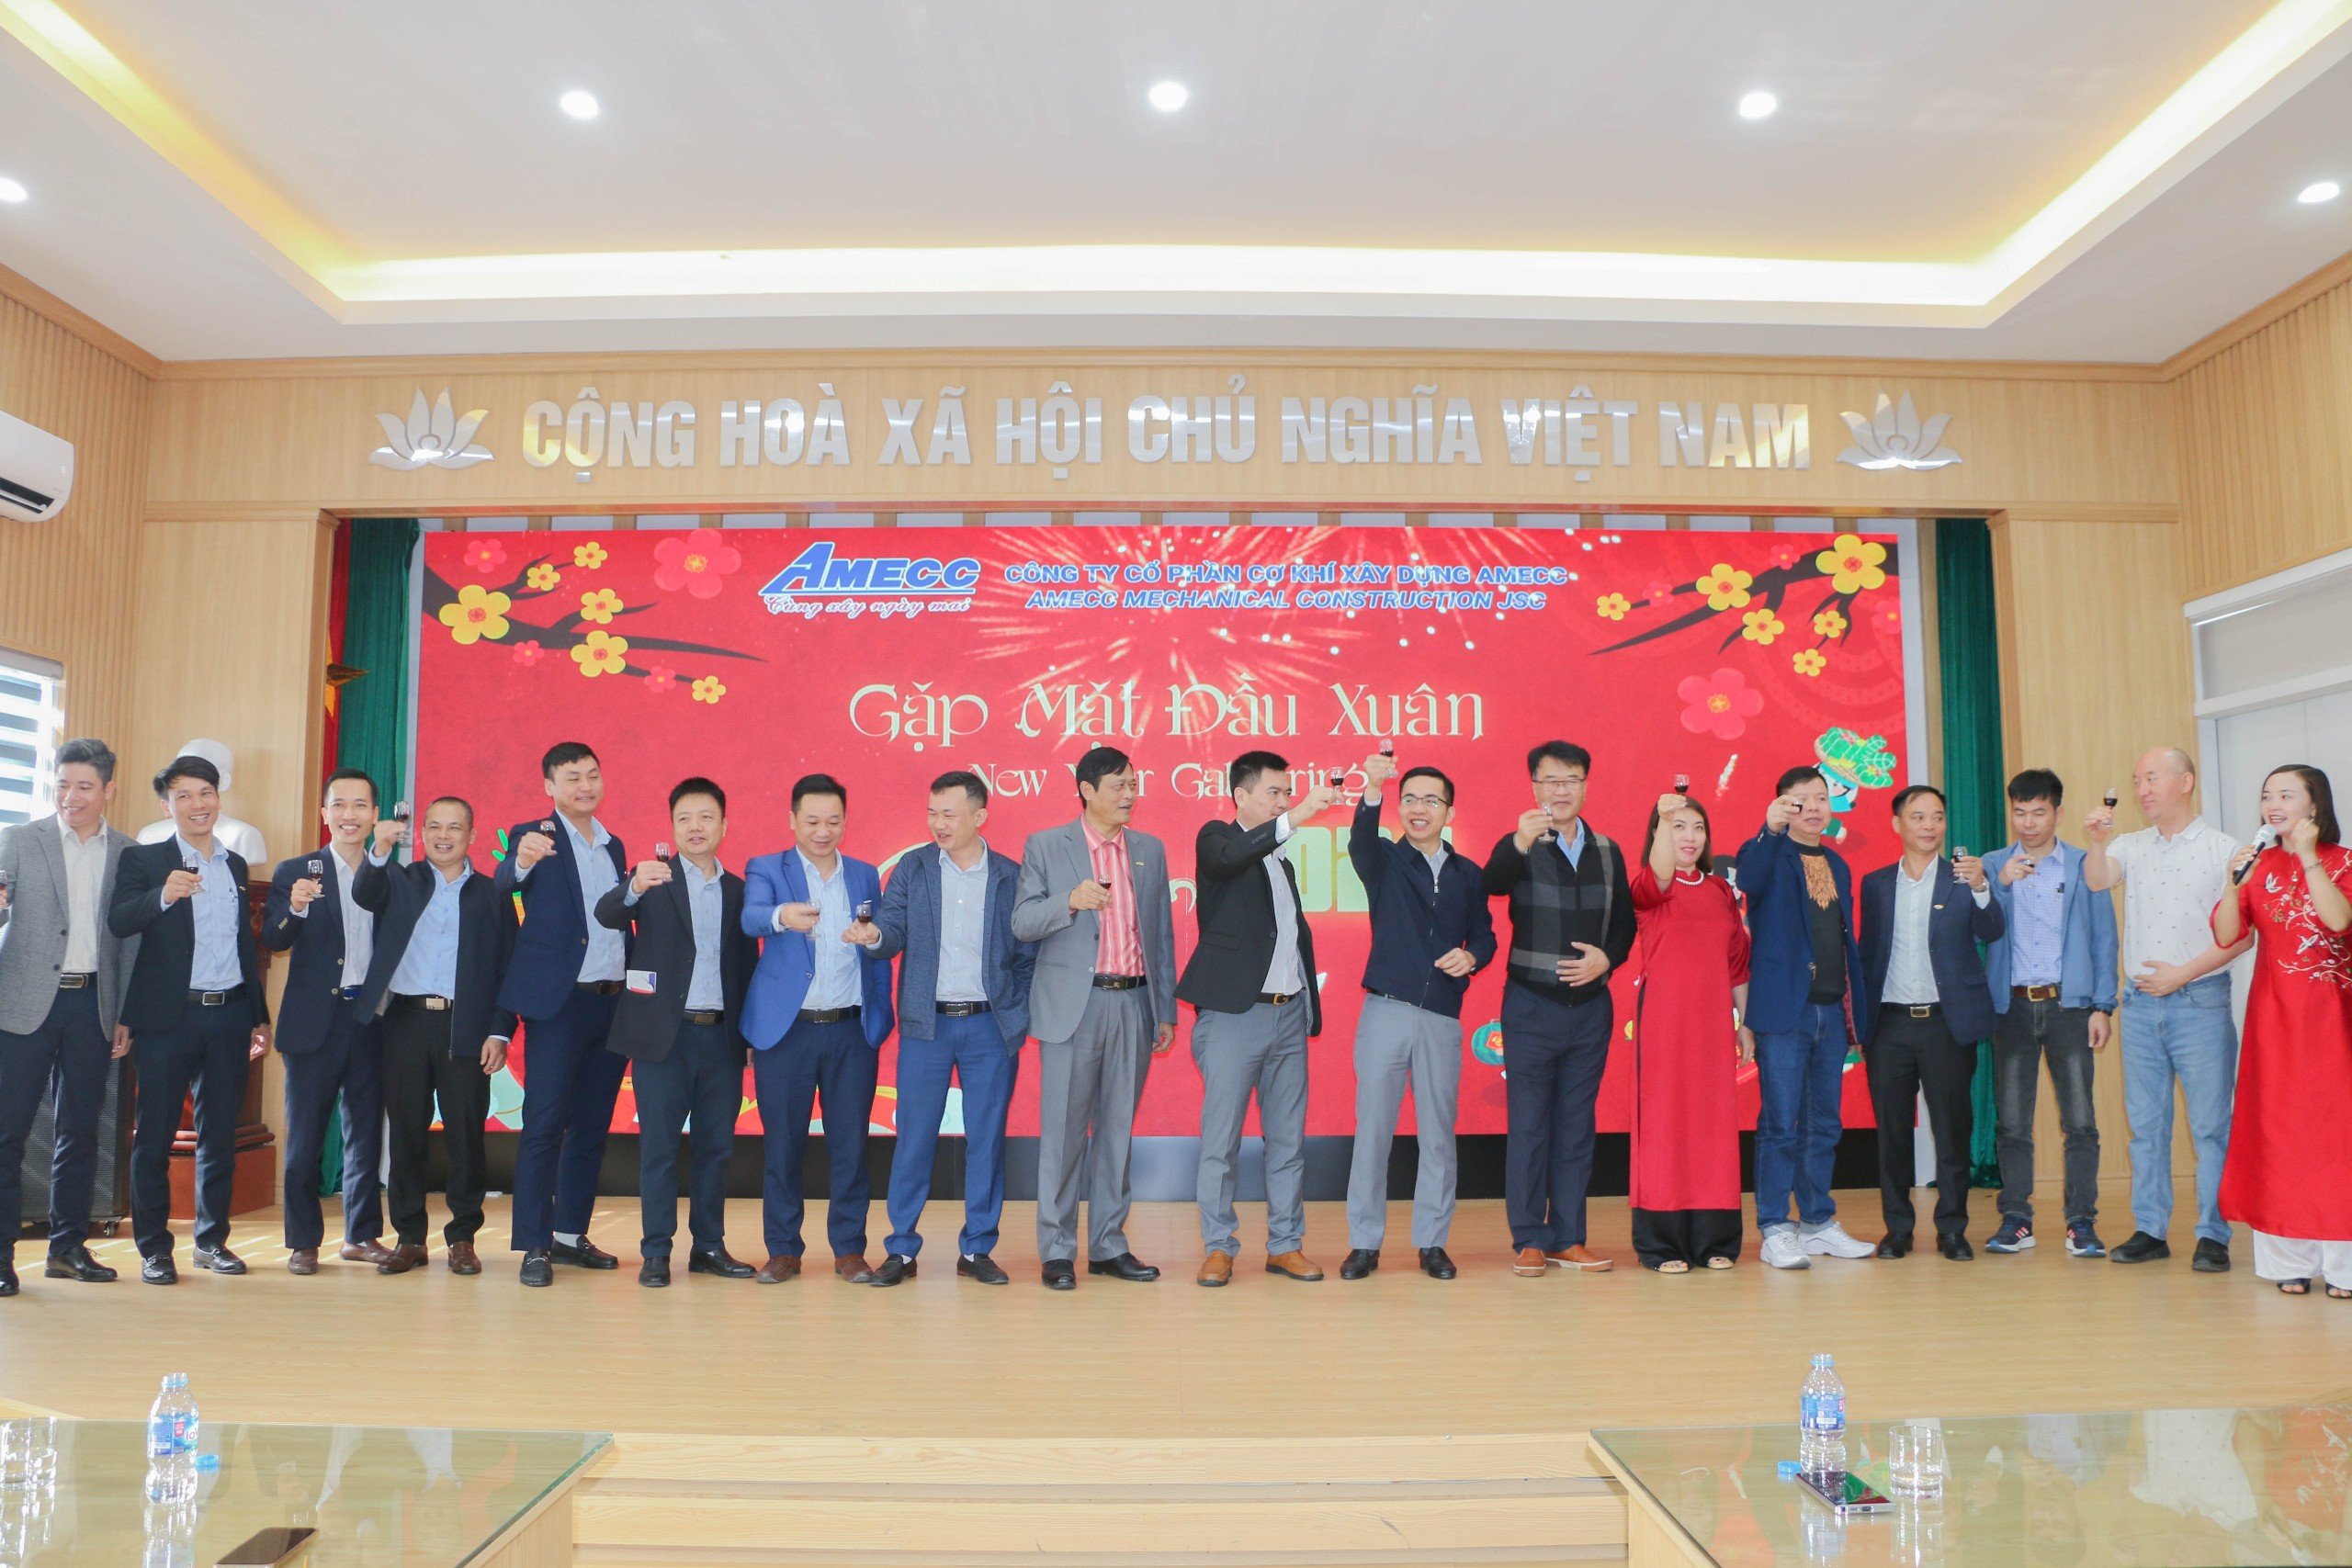 Welcome to the New Year at Amecc: Spring Gathering of the Year of the Dragon 2024